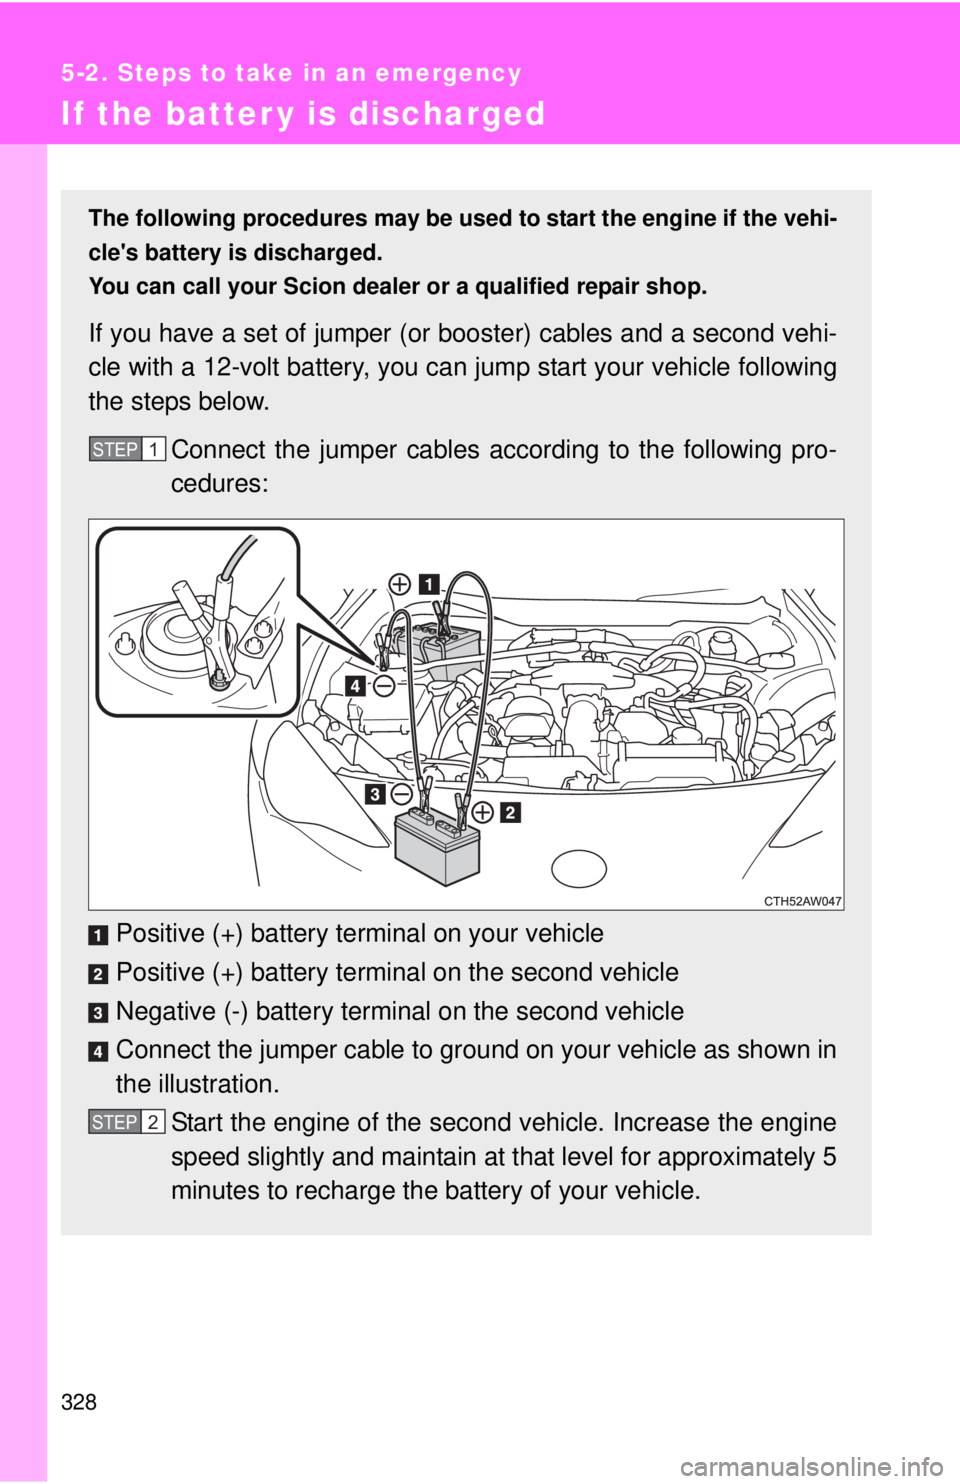 TOYOTA FR-S 2013  Owners Manual (in English) 328
5-2. Steps to take in an emergency
If the batter y is discharged
The following procedures may be used to start the engine if the vehi-
cles battery is discharged. 
You can call your Scion dealer 